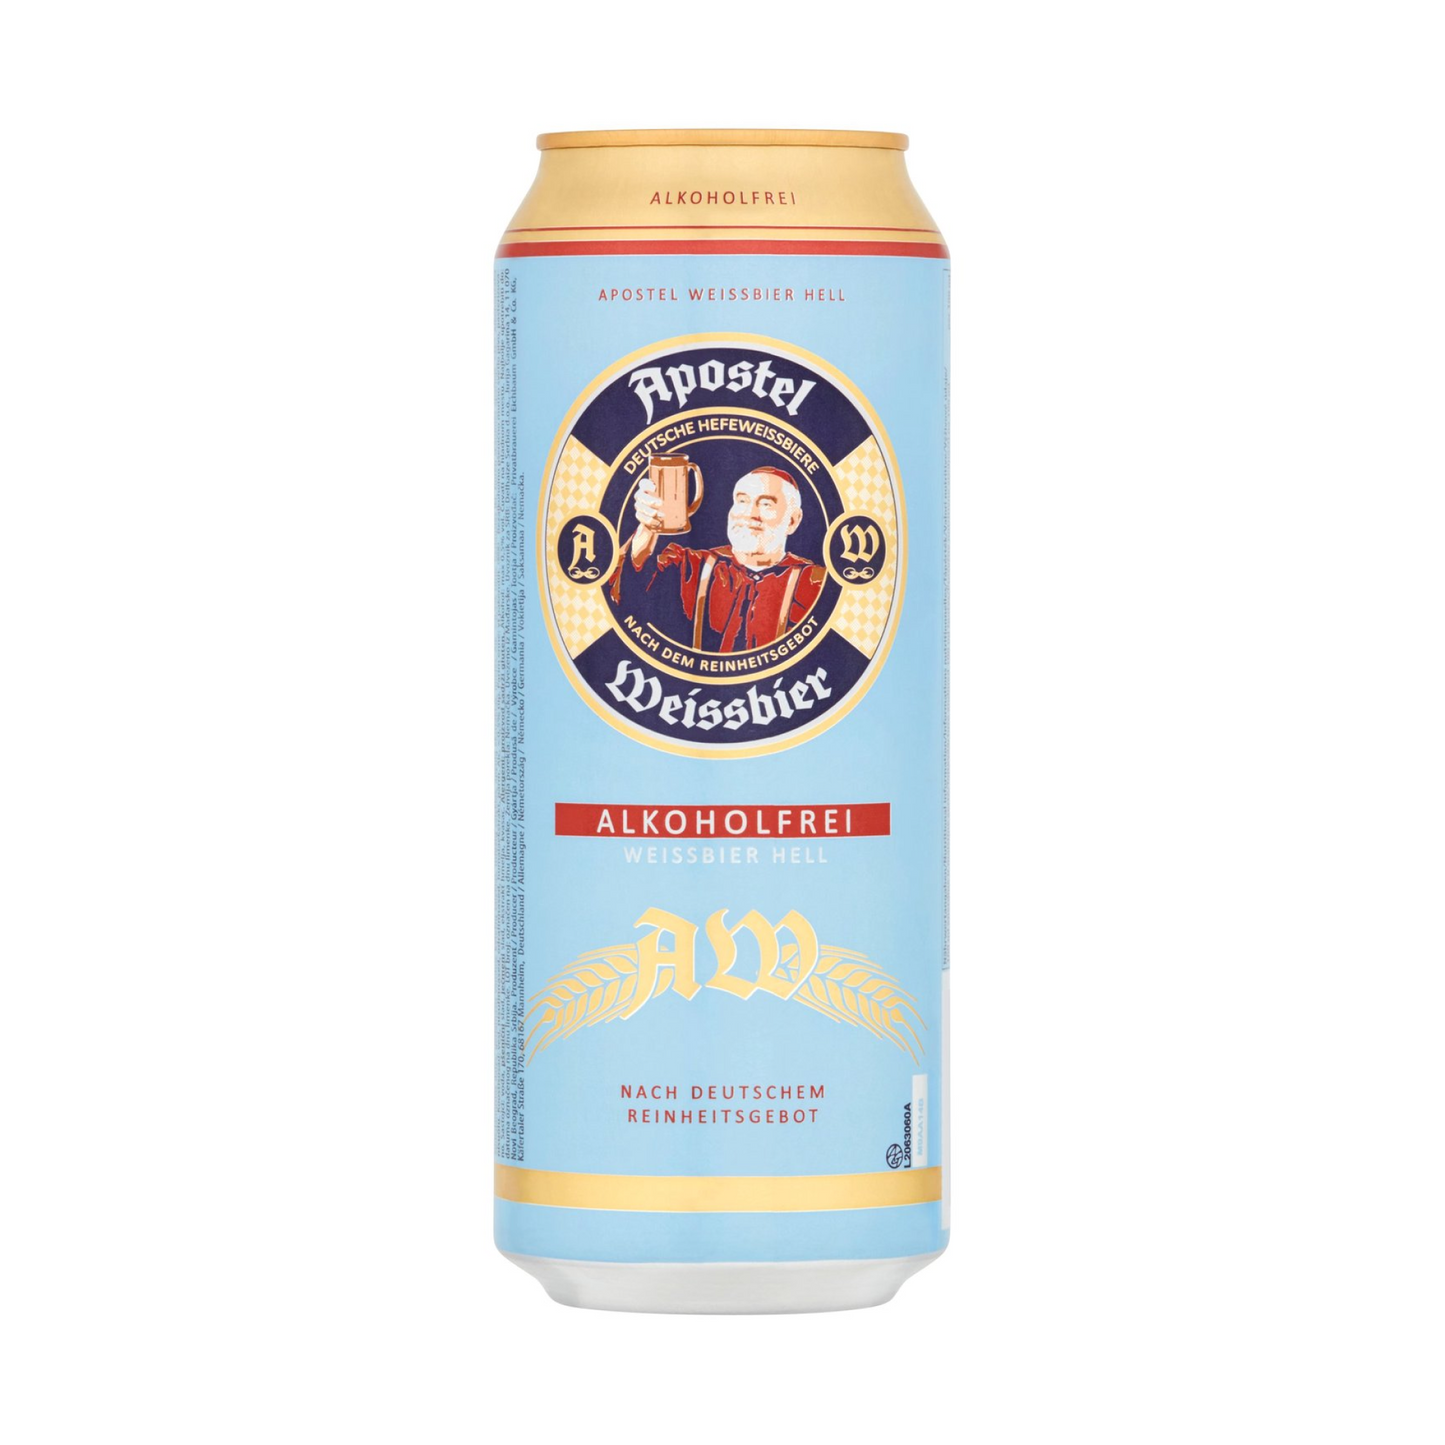 Apostel Non-Alcoholic Weissbier Hell 500ml